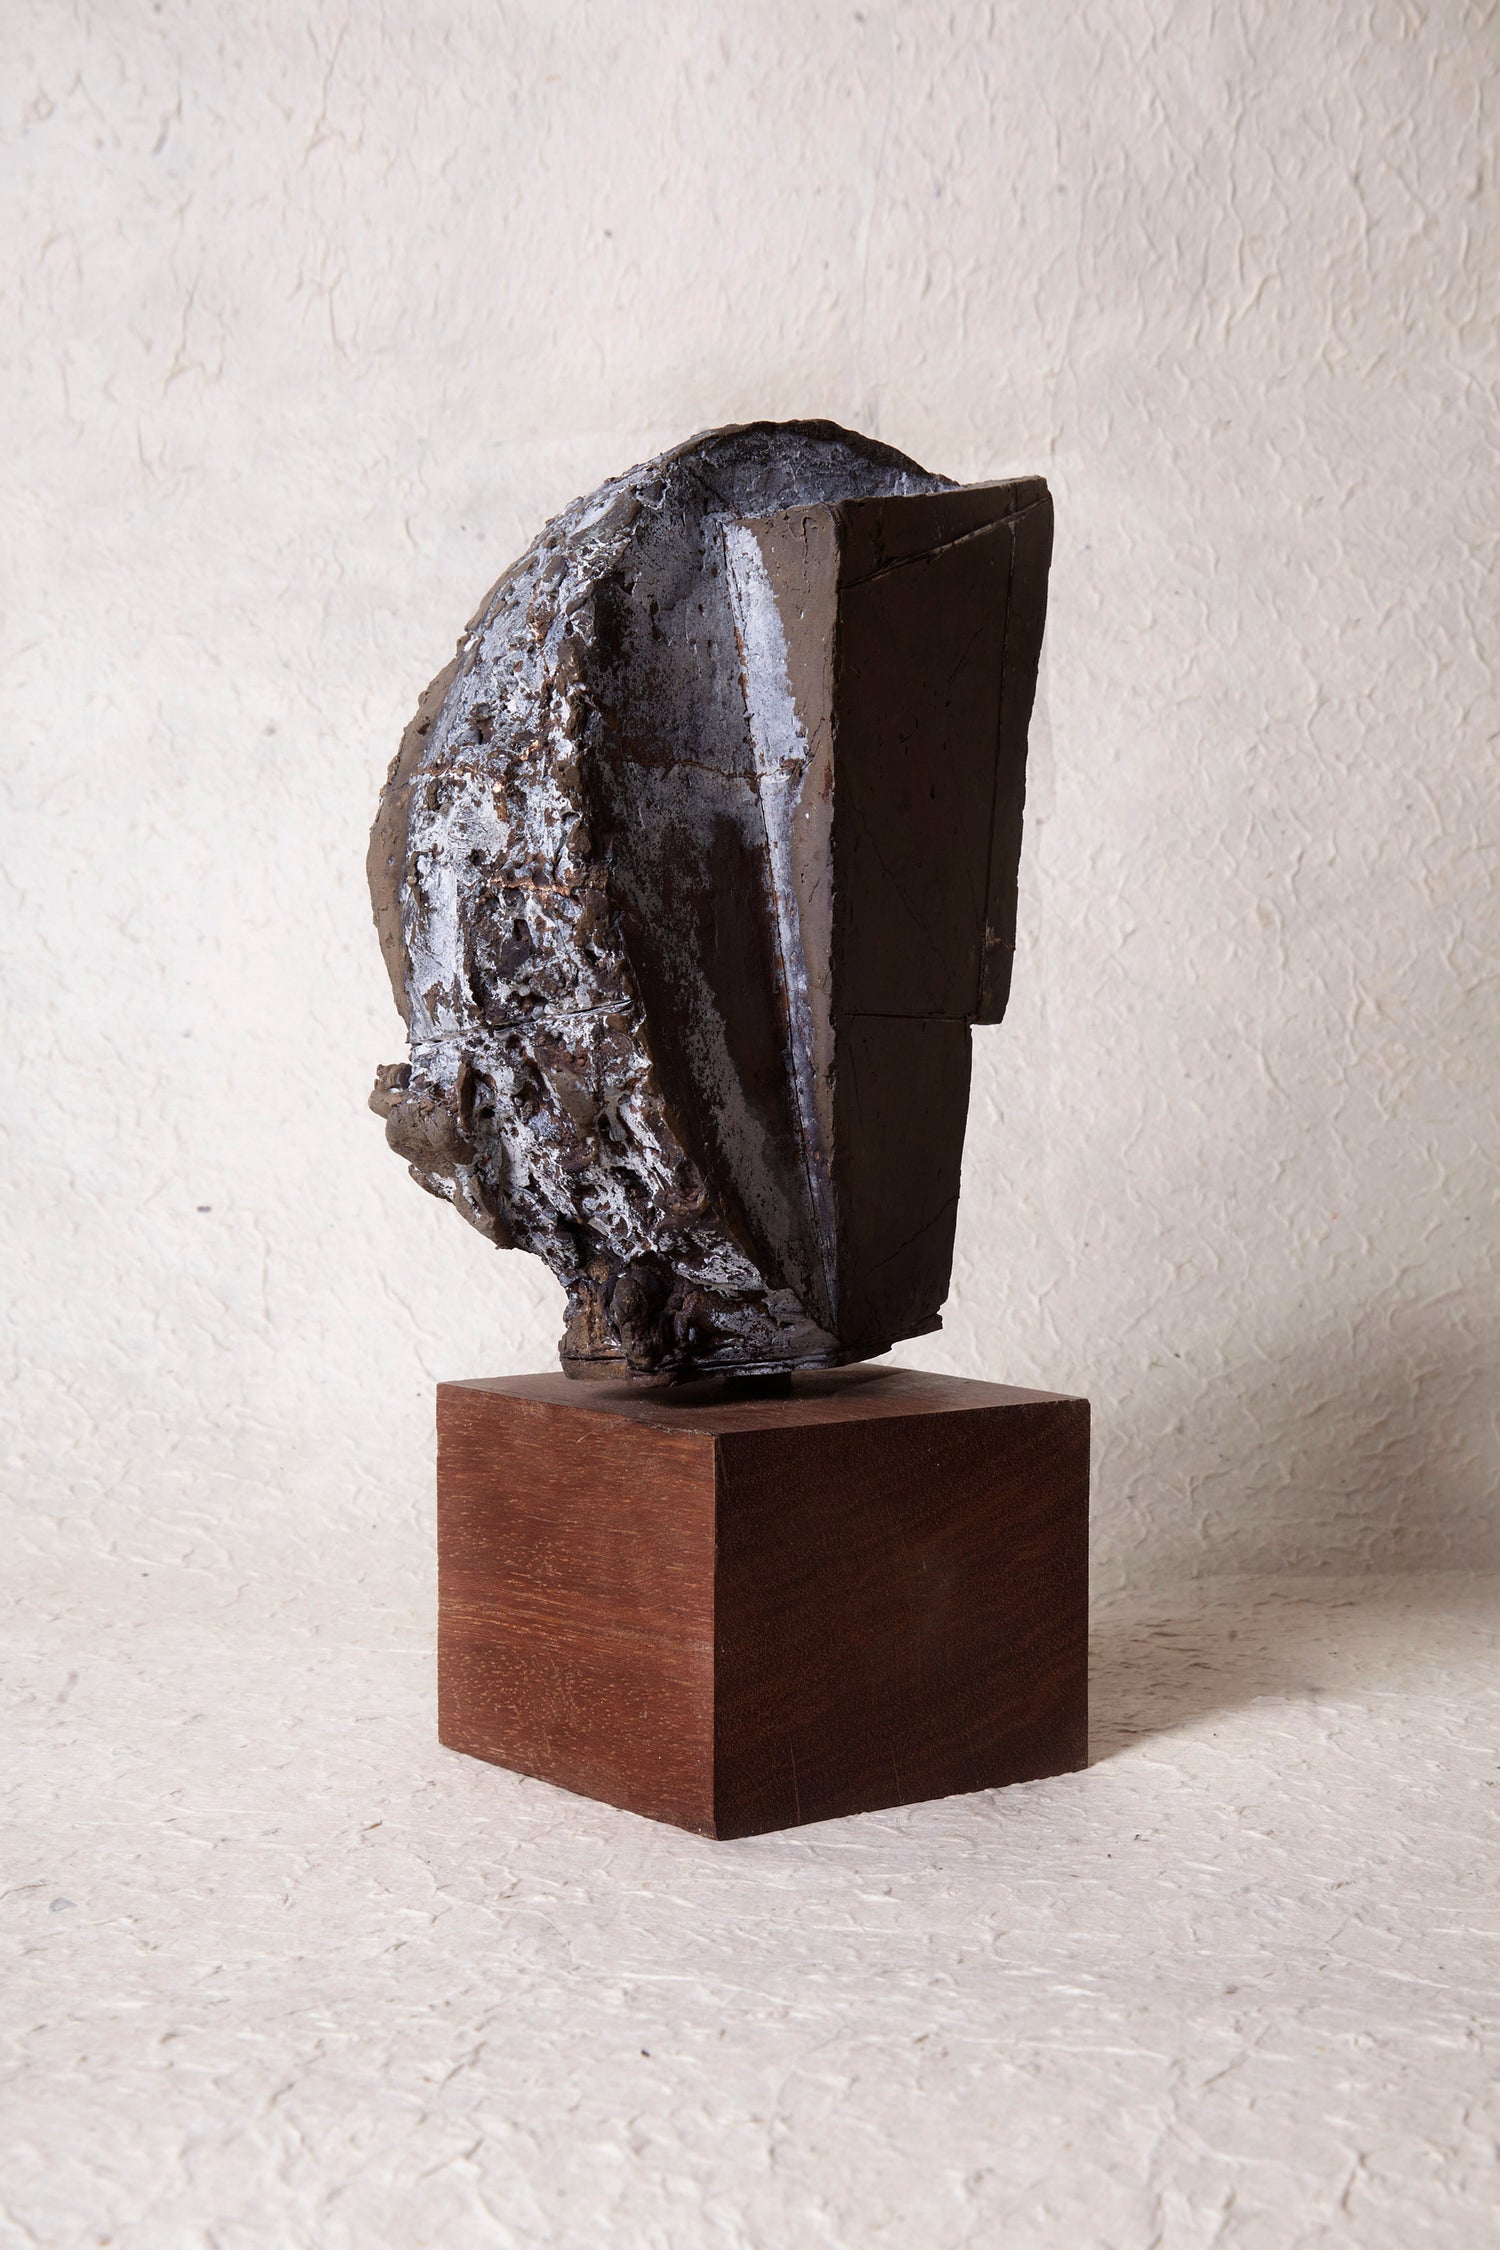 BRONZE SCULPTURE "LITTLE ABSTRACT HEAD XII" IN BRONZE BY THOMAS JUNGHANS